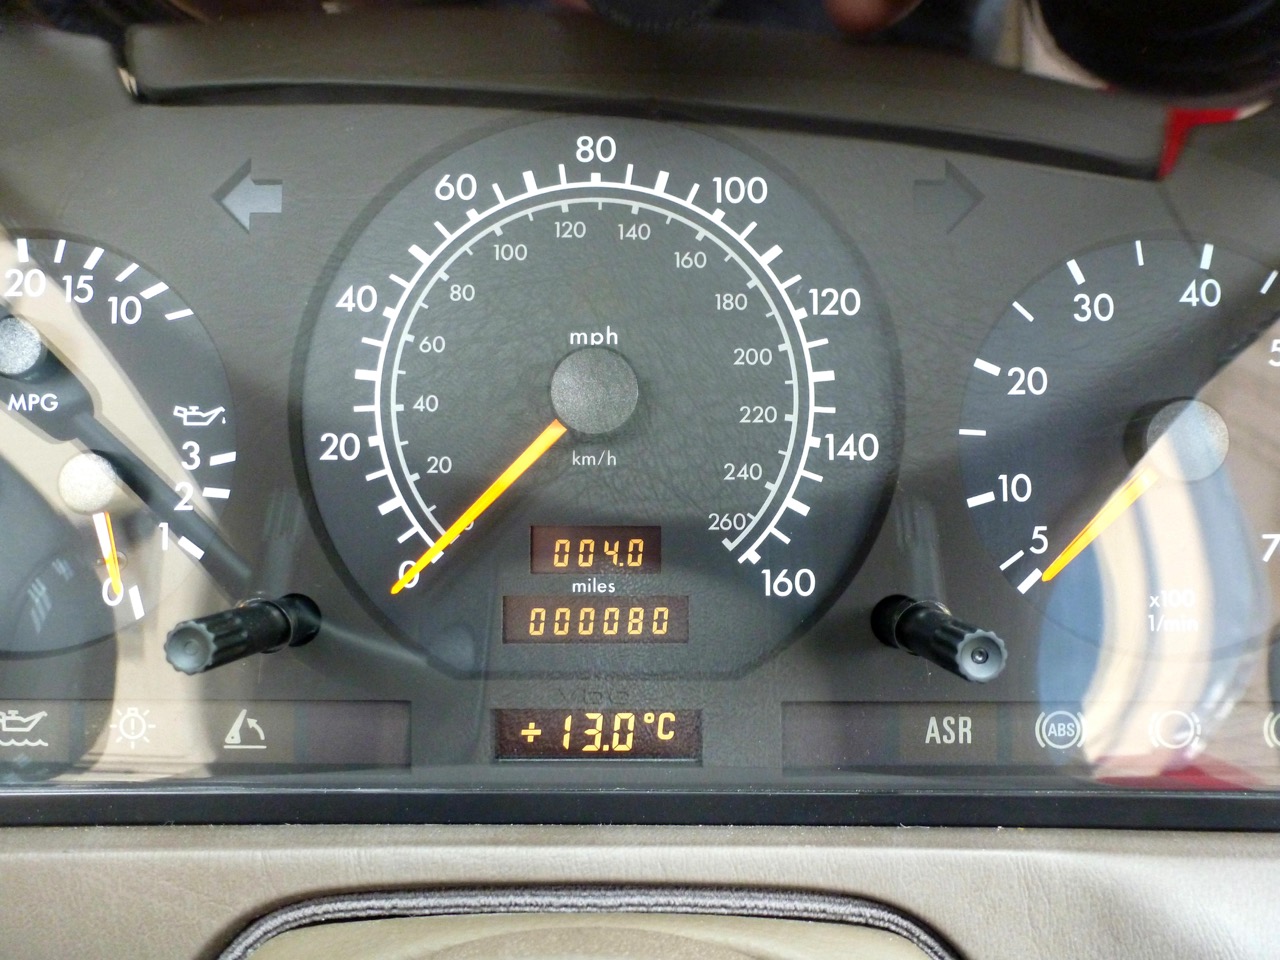 Car sold with 80 miles on its odometer